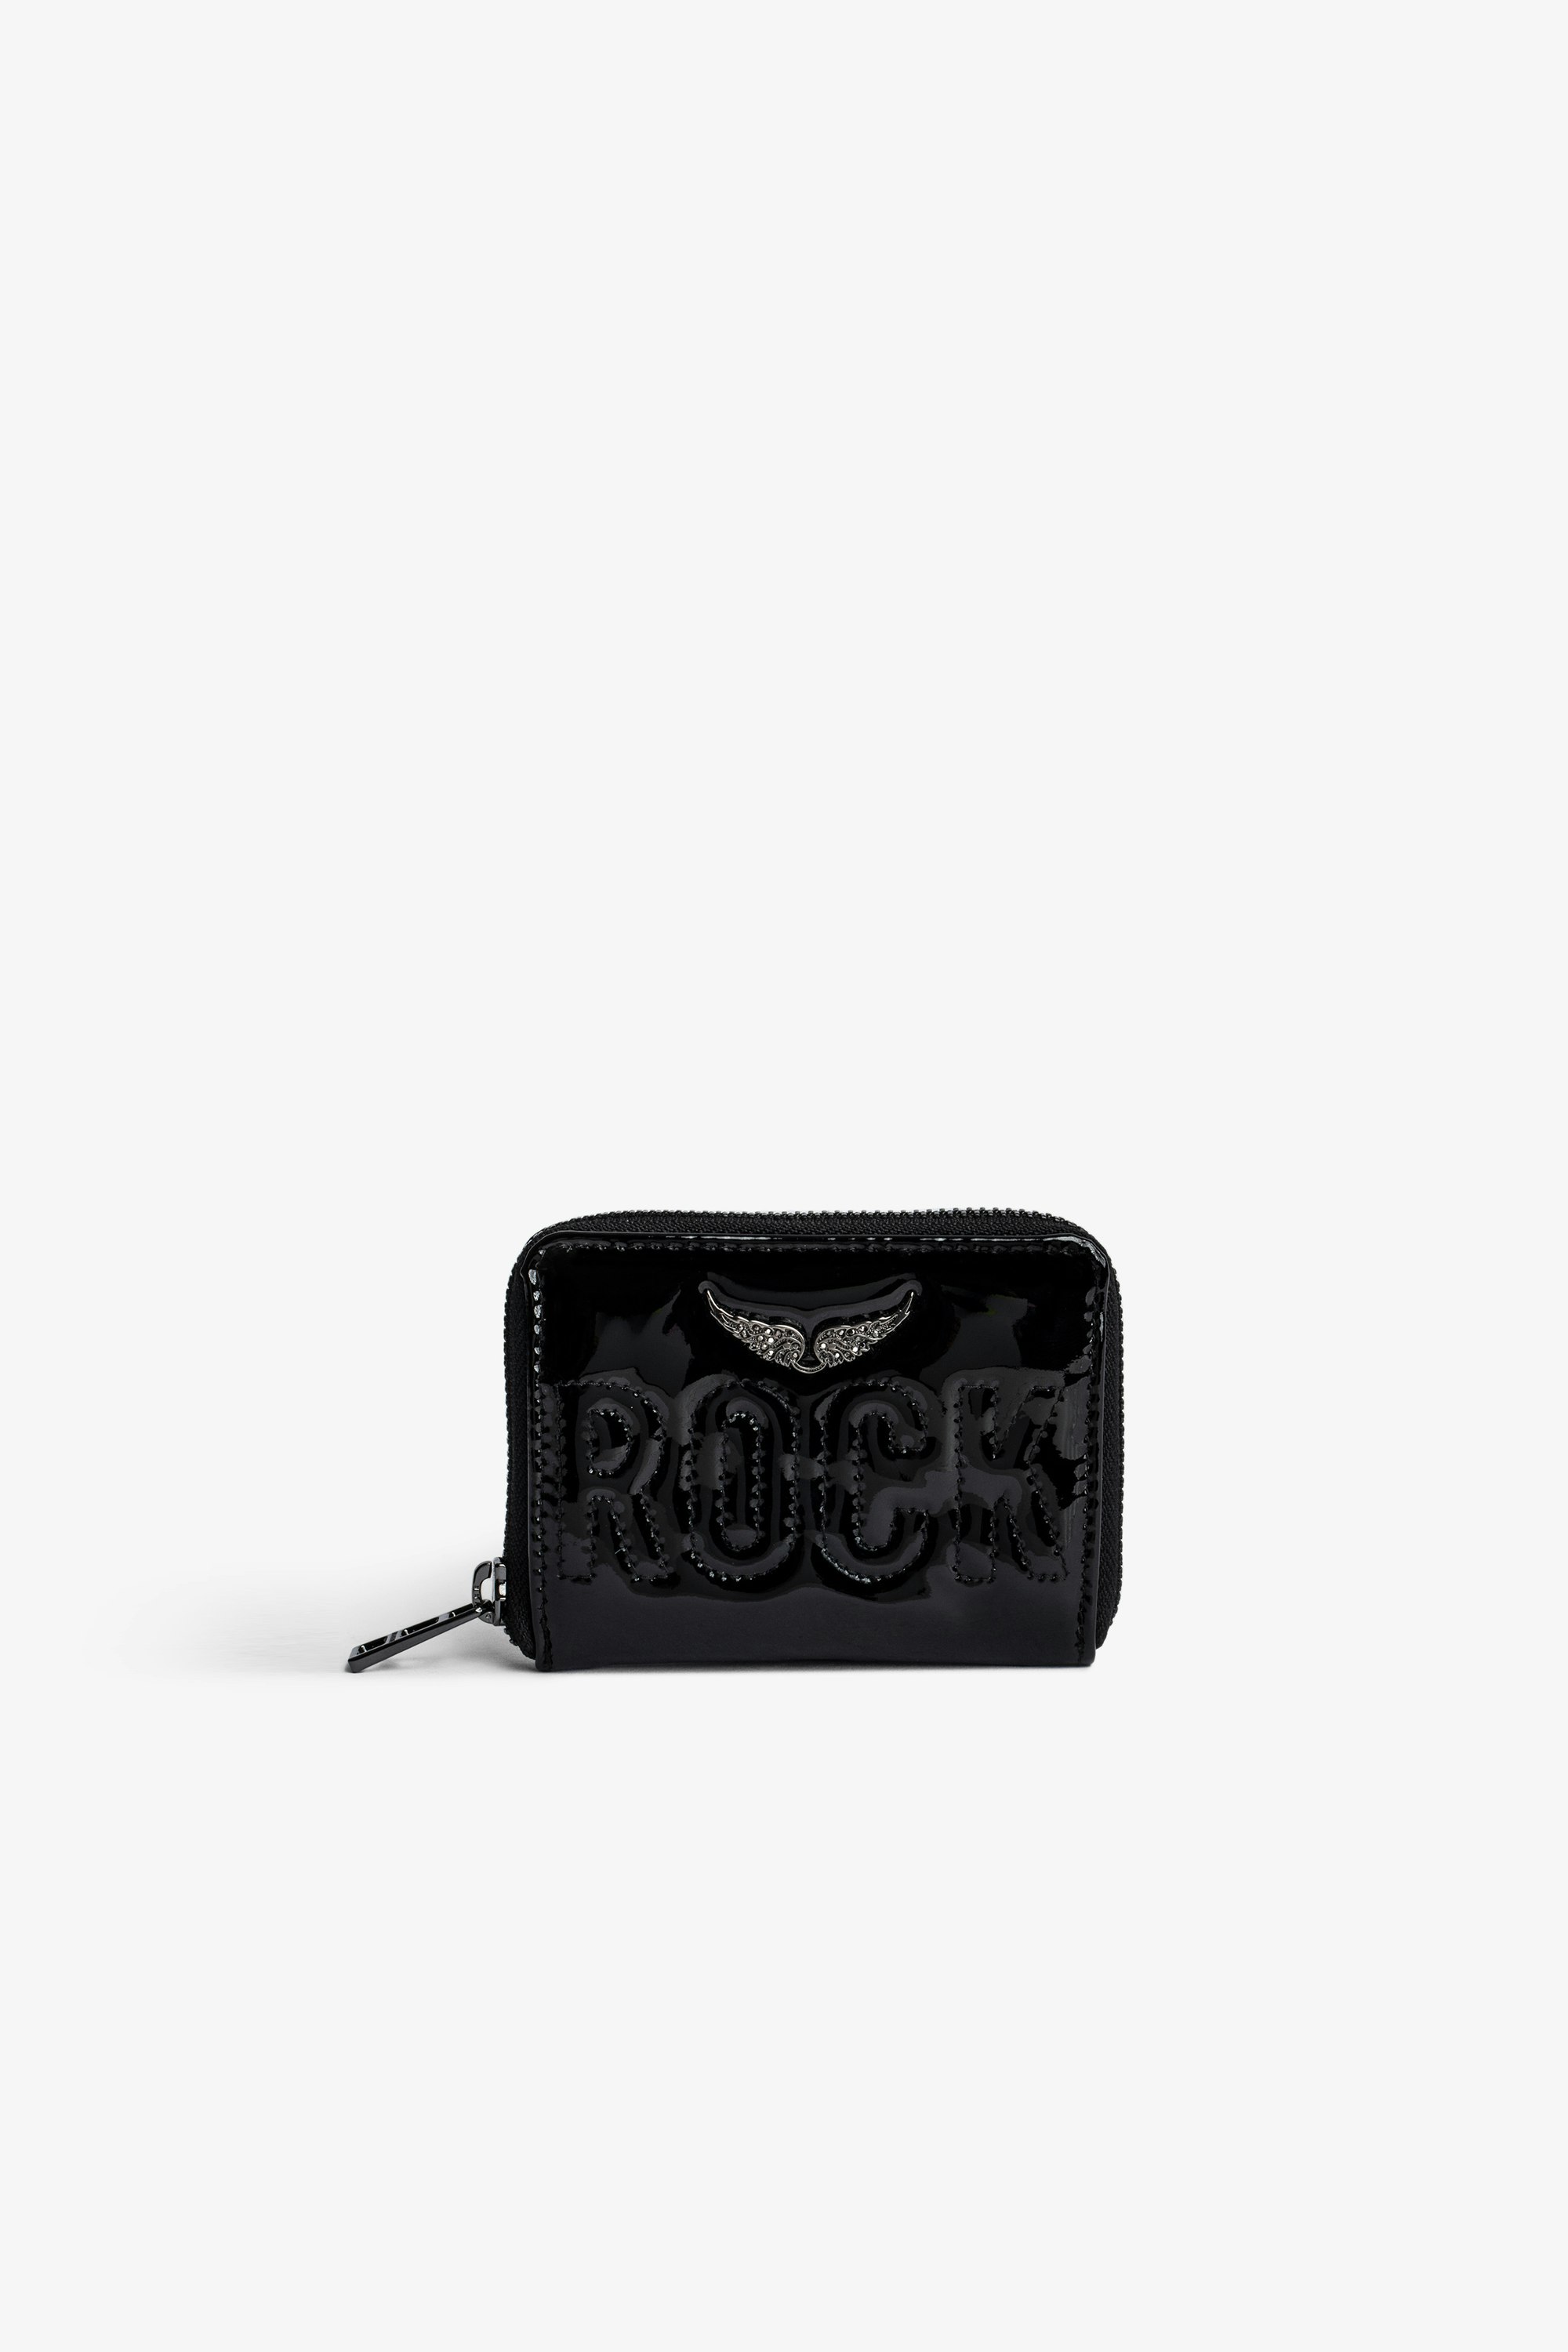 Mini ZV Coin 財布 Women’s black patent leather zipped coin purse with topstitched “Rock” slogan and crystal-embellished wings charm